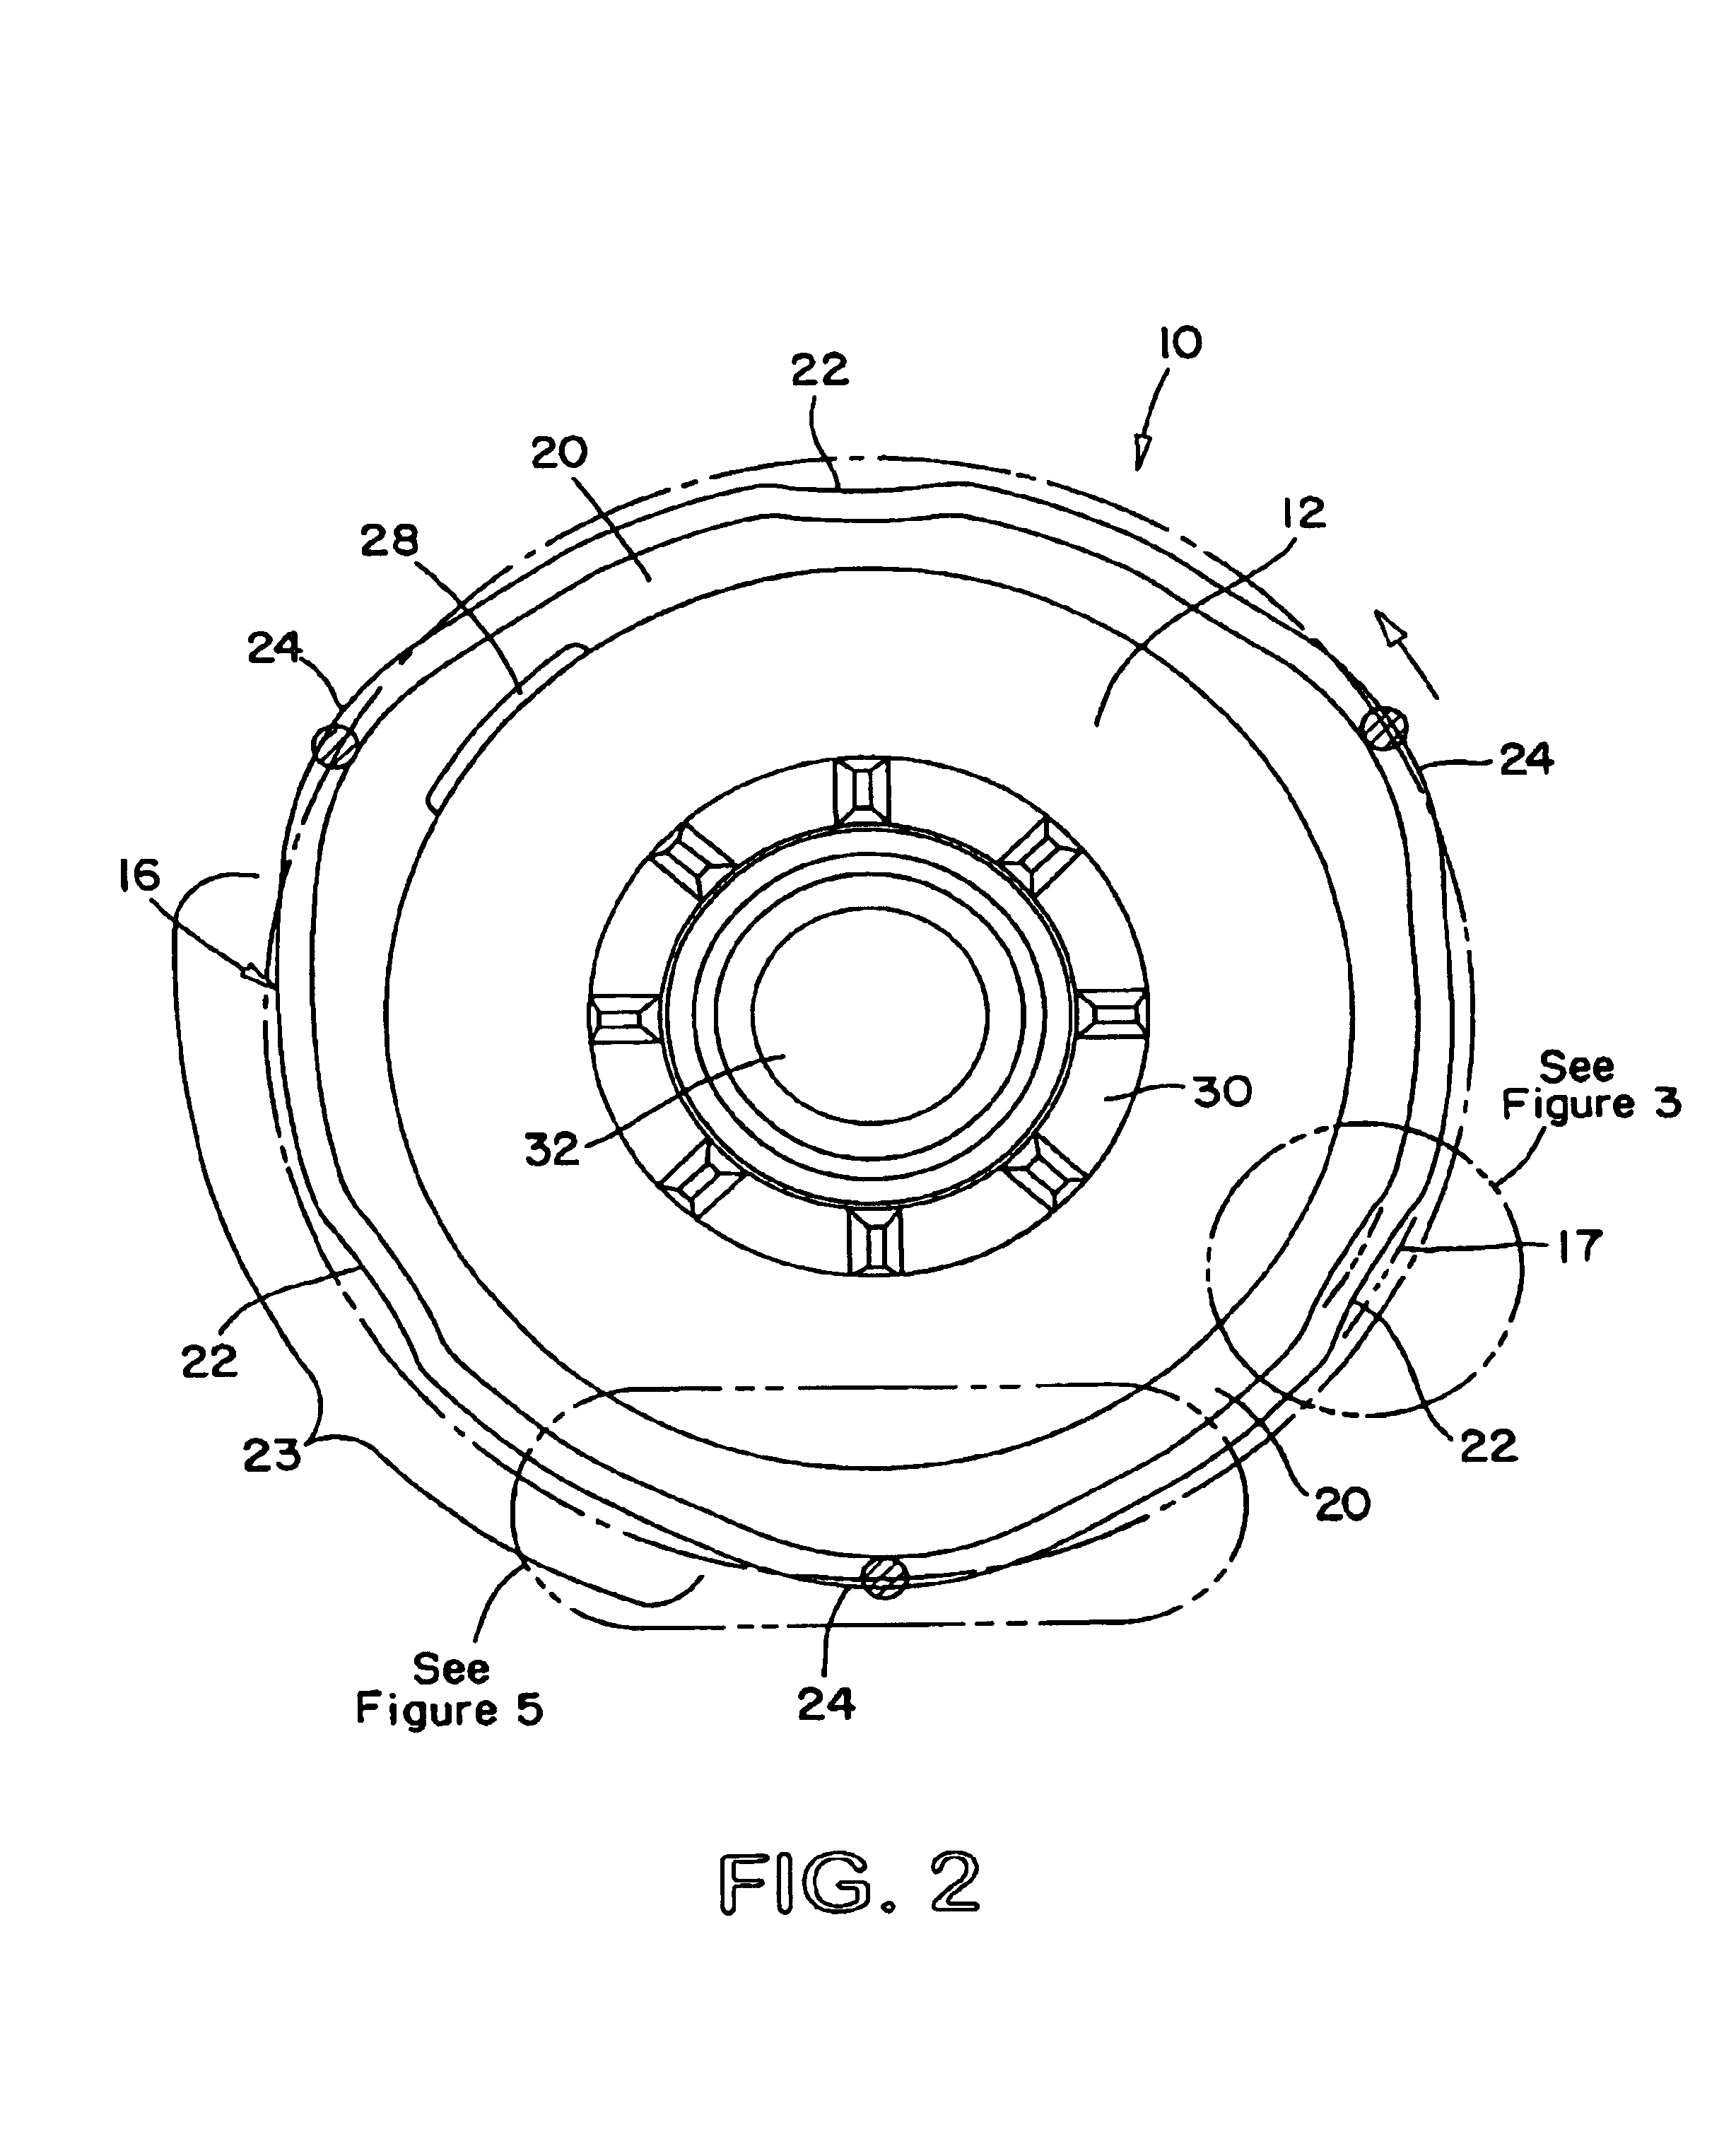 Base receptacle for filter cartridge incorporating a peripheral compatibility matrix